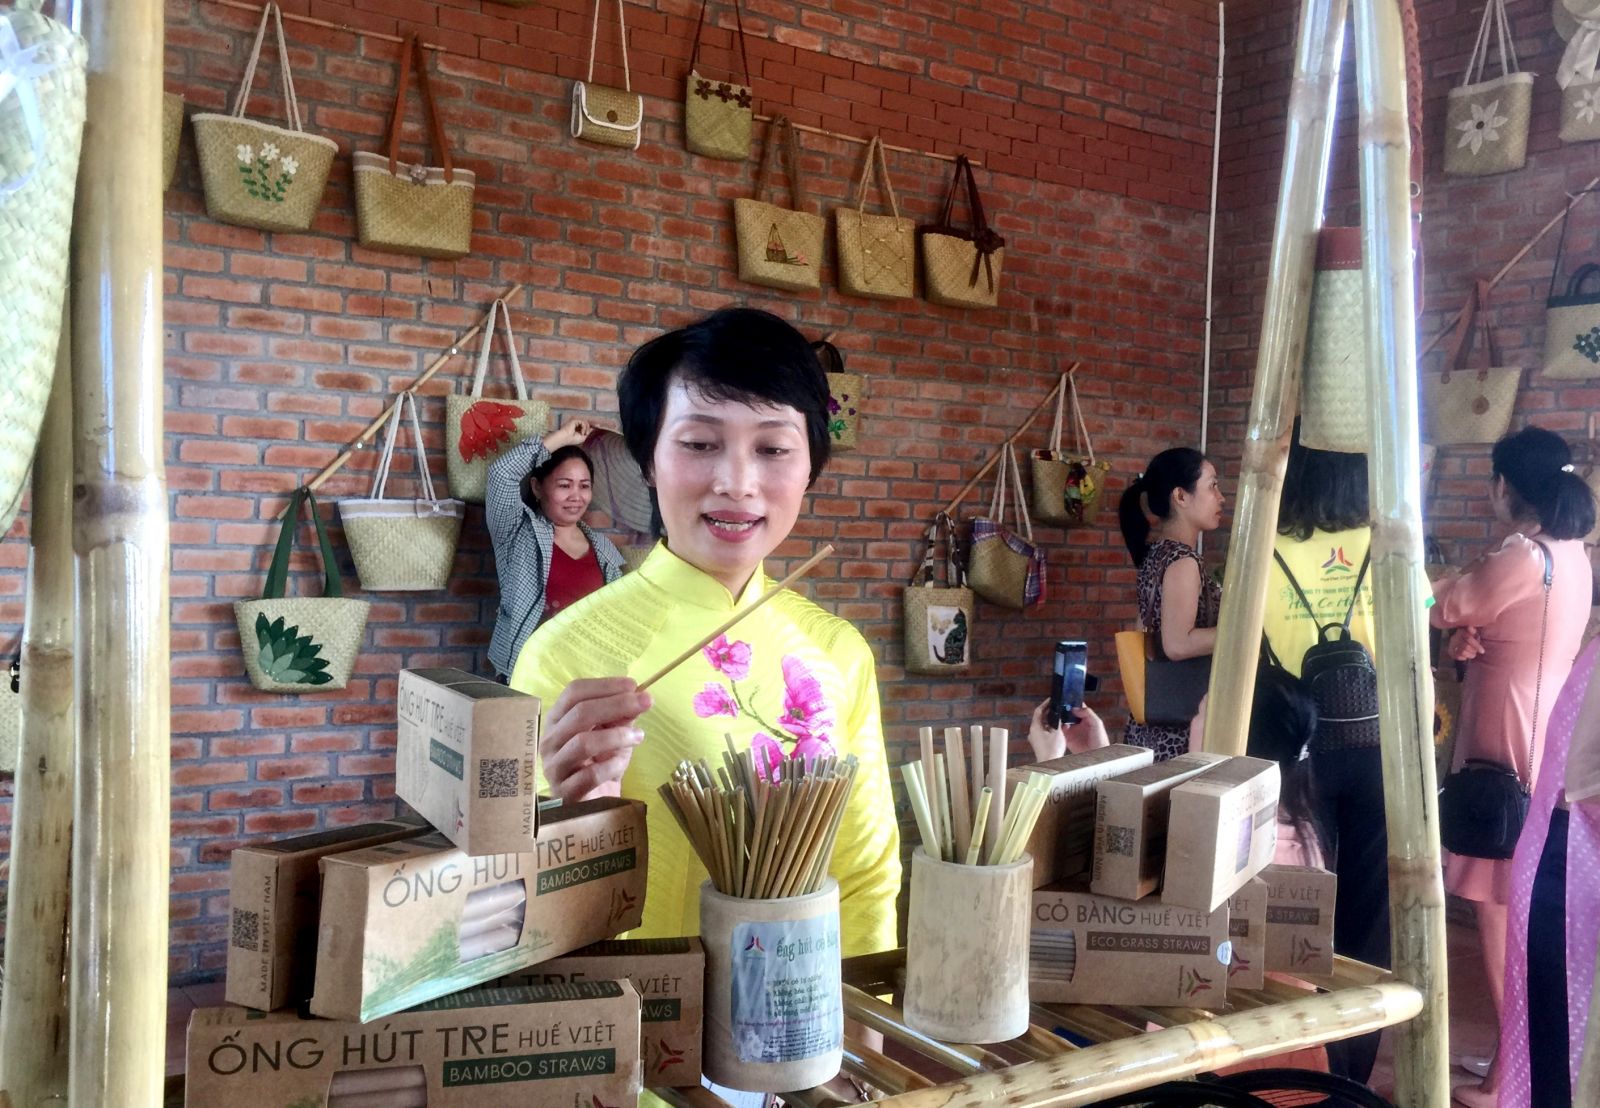 … and bamboo straws. All of the above-mentioned products are made from natural and eco-friendly materials.